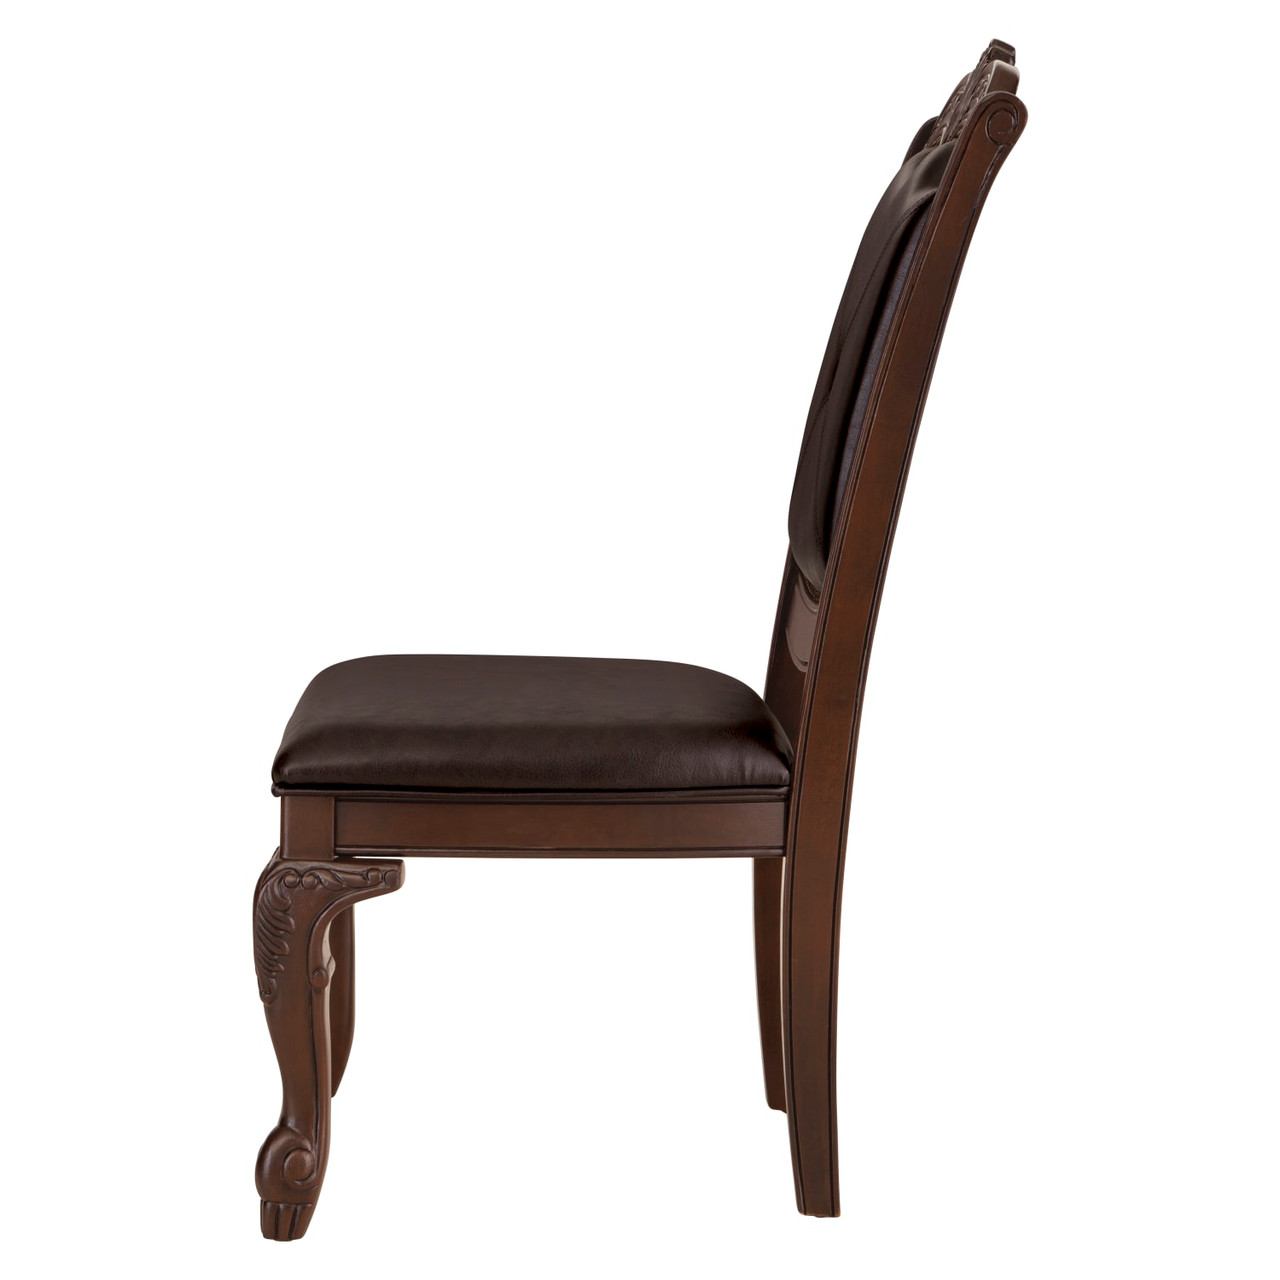 Alexandria Set of 2 Dining Chairs